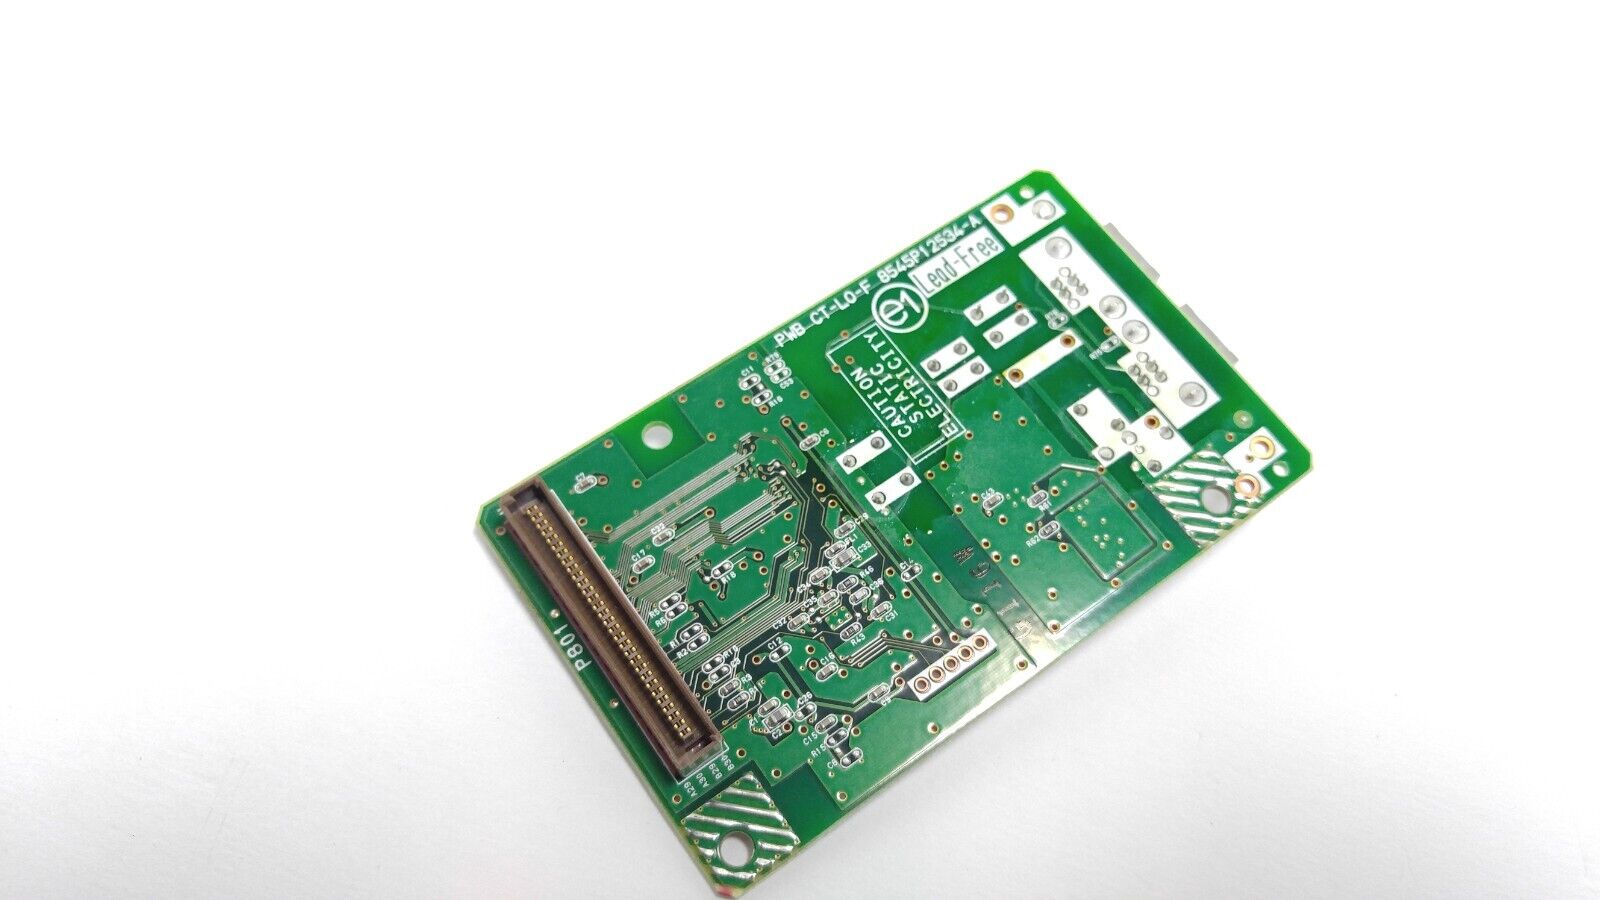 Dell C2665dnf Fax board assembly - 960K67970 - Click Image to Close